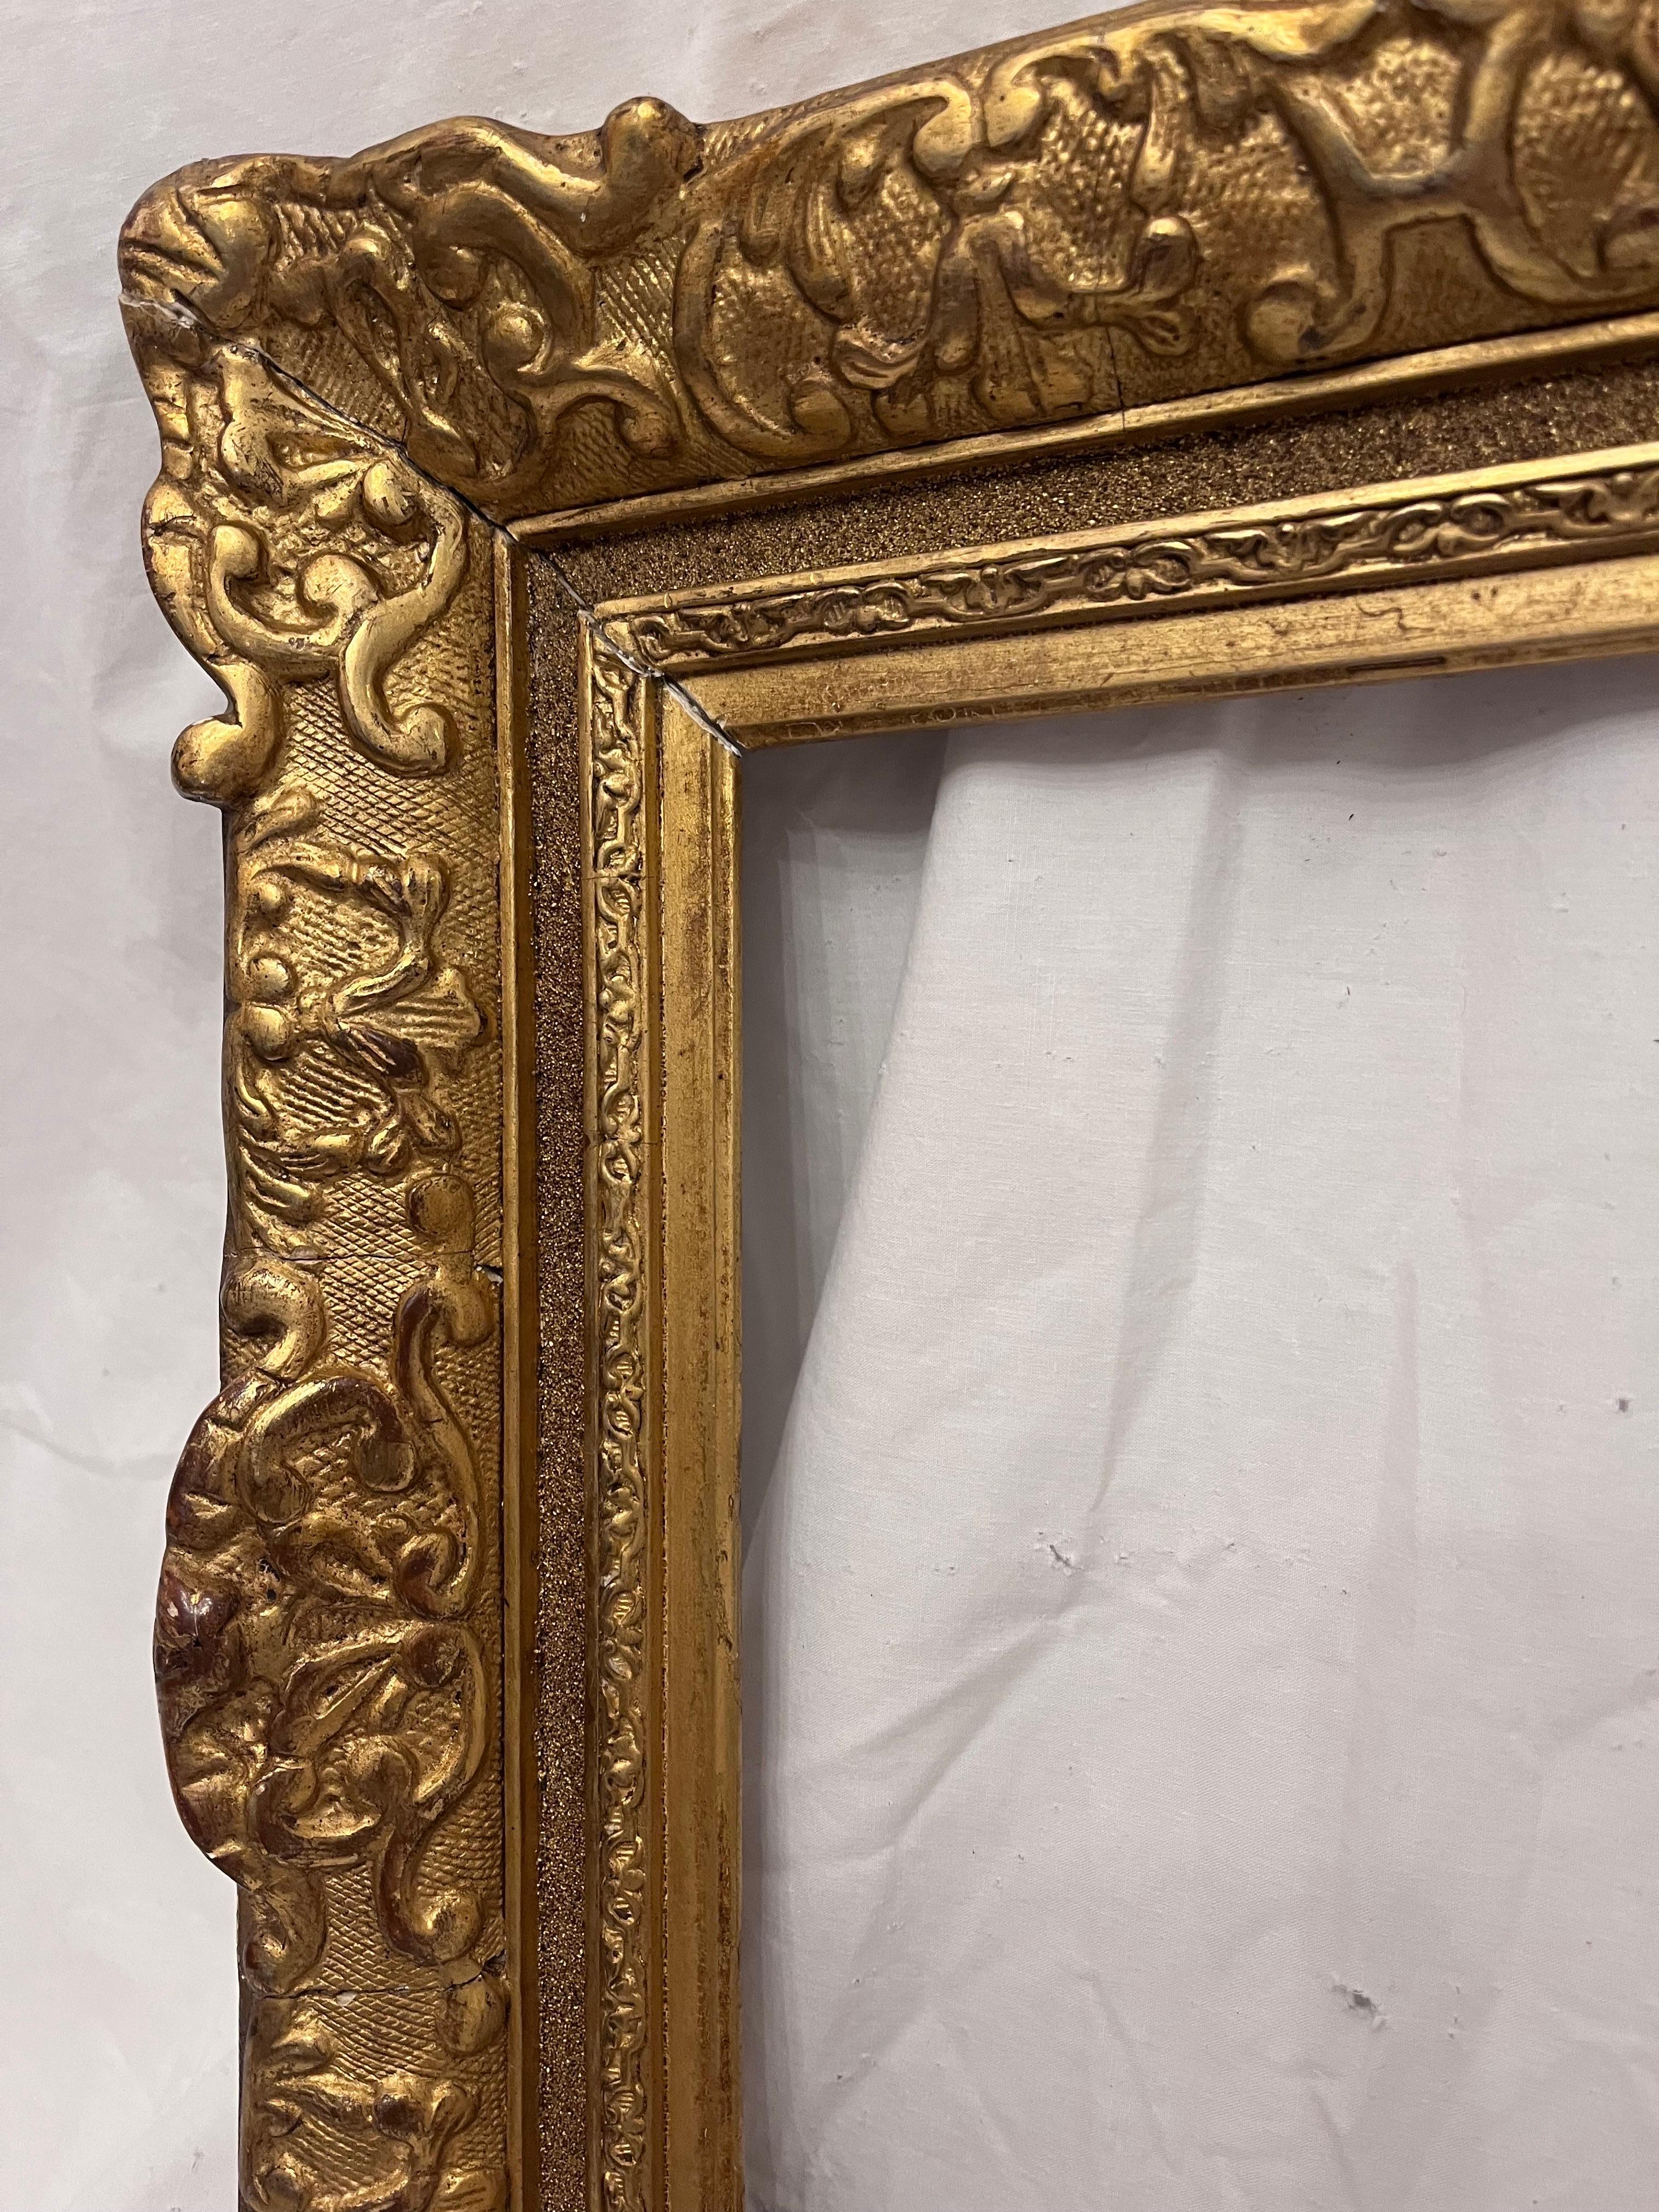 Gesso Antique 19th Century Louis XIV Style Dubourg Ornate French Picture Frame 15 x 10